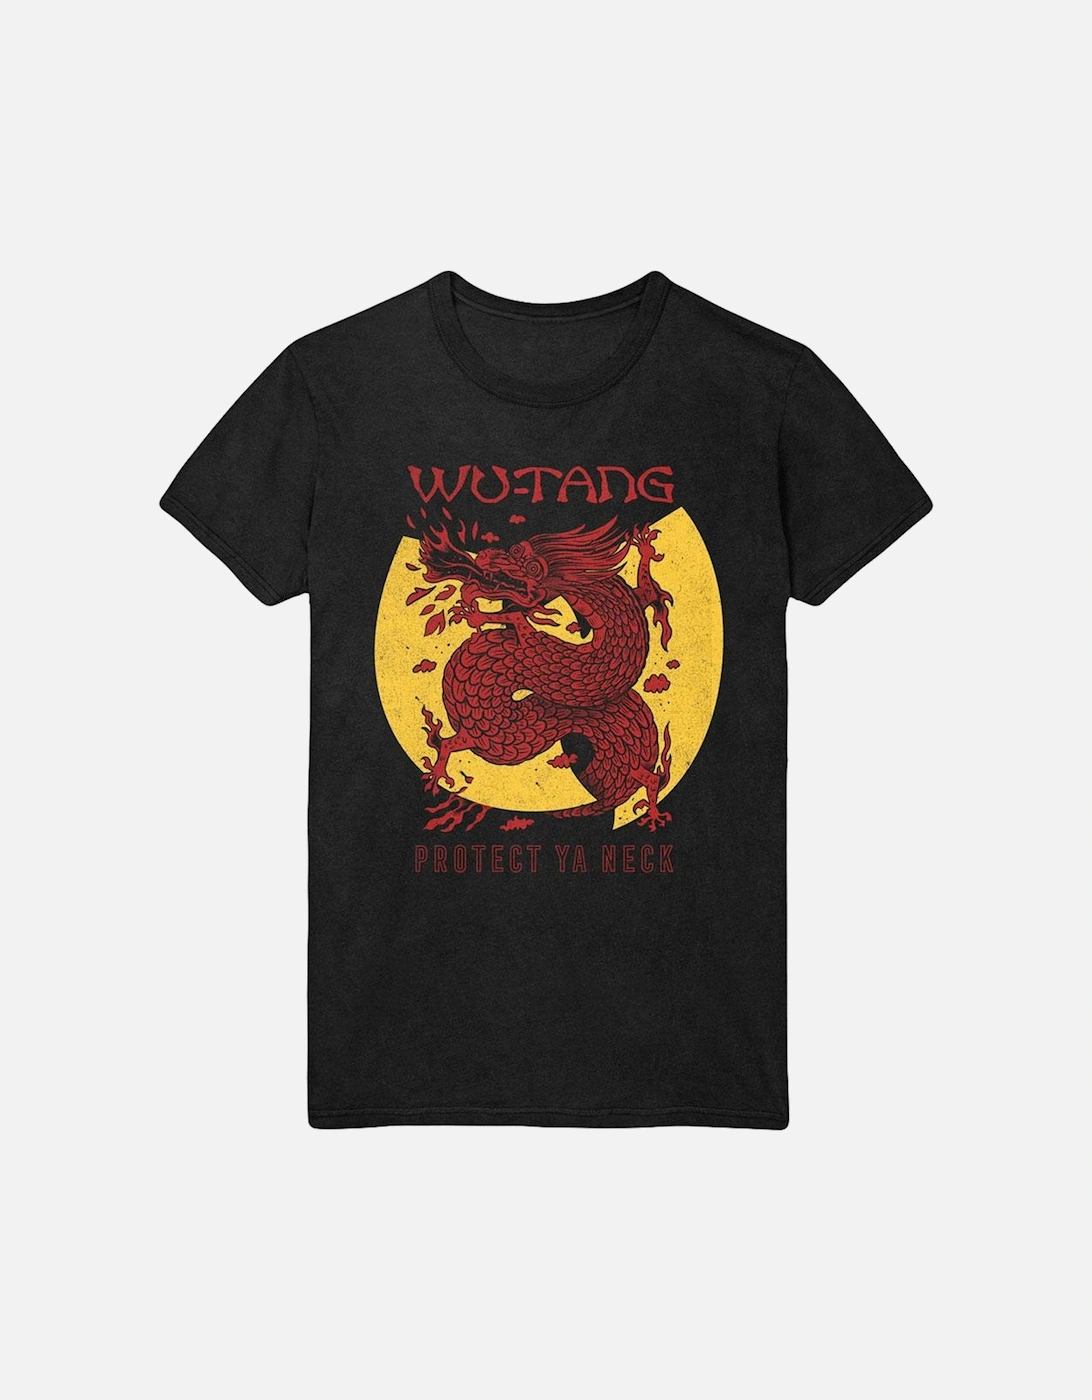 Unisex Adult Inferno T-Shirt, 2 of 1